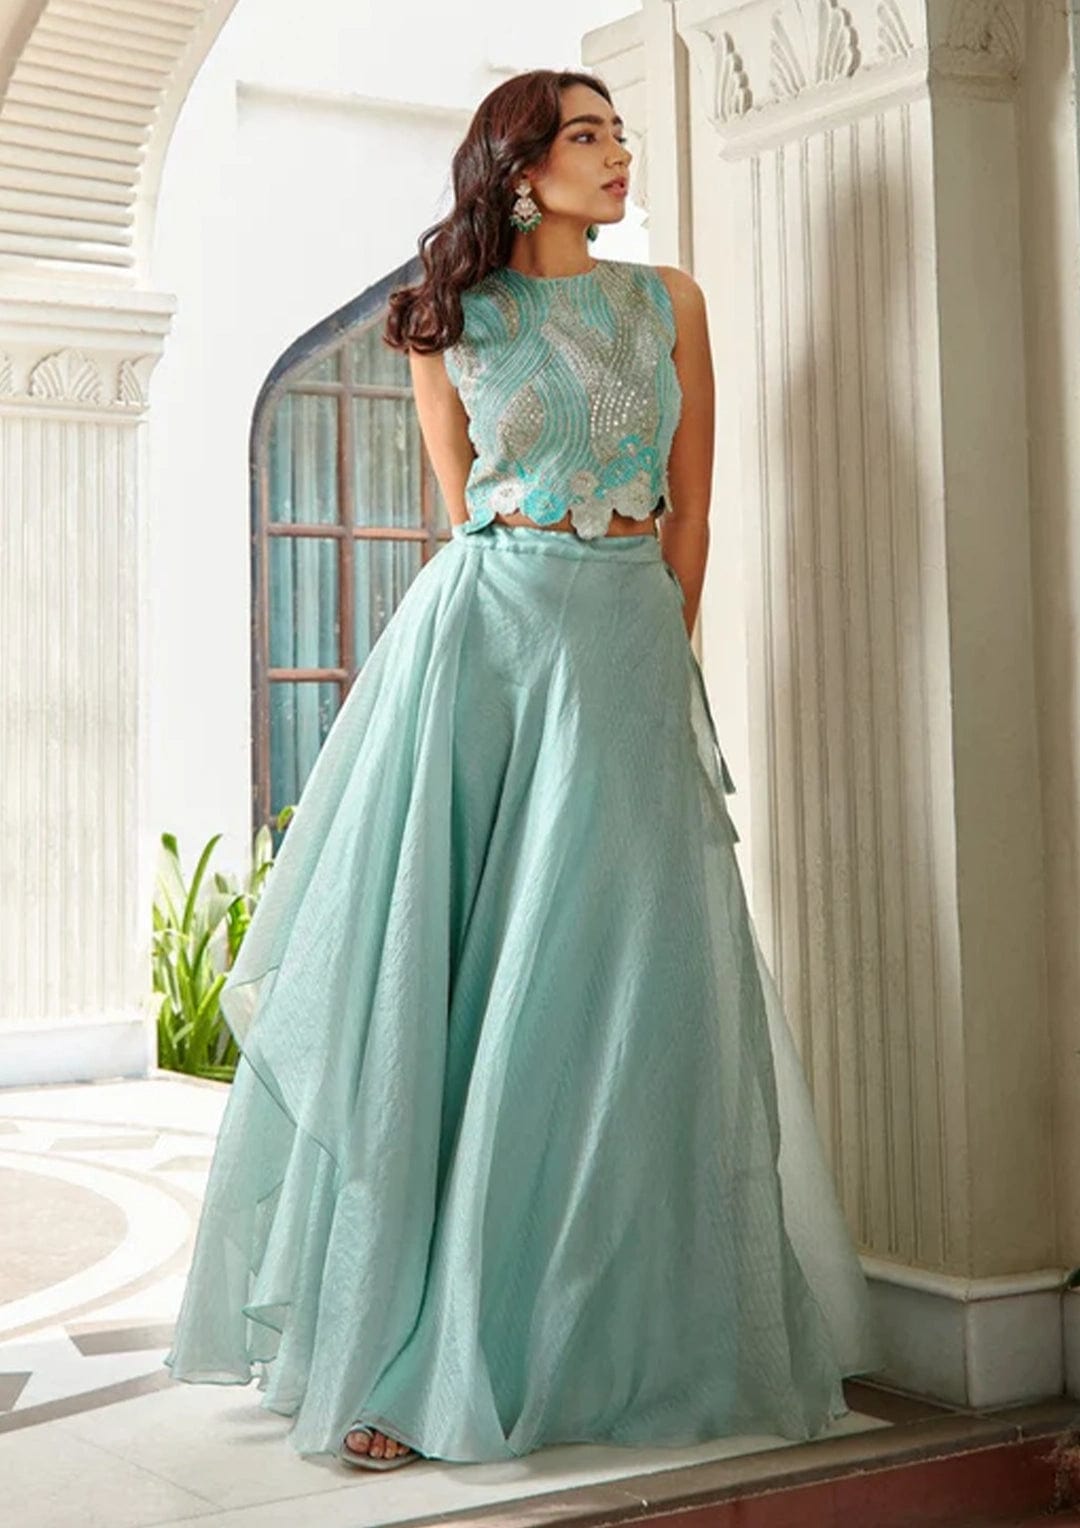 Teal Appliqued Top and Skirt